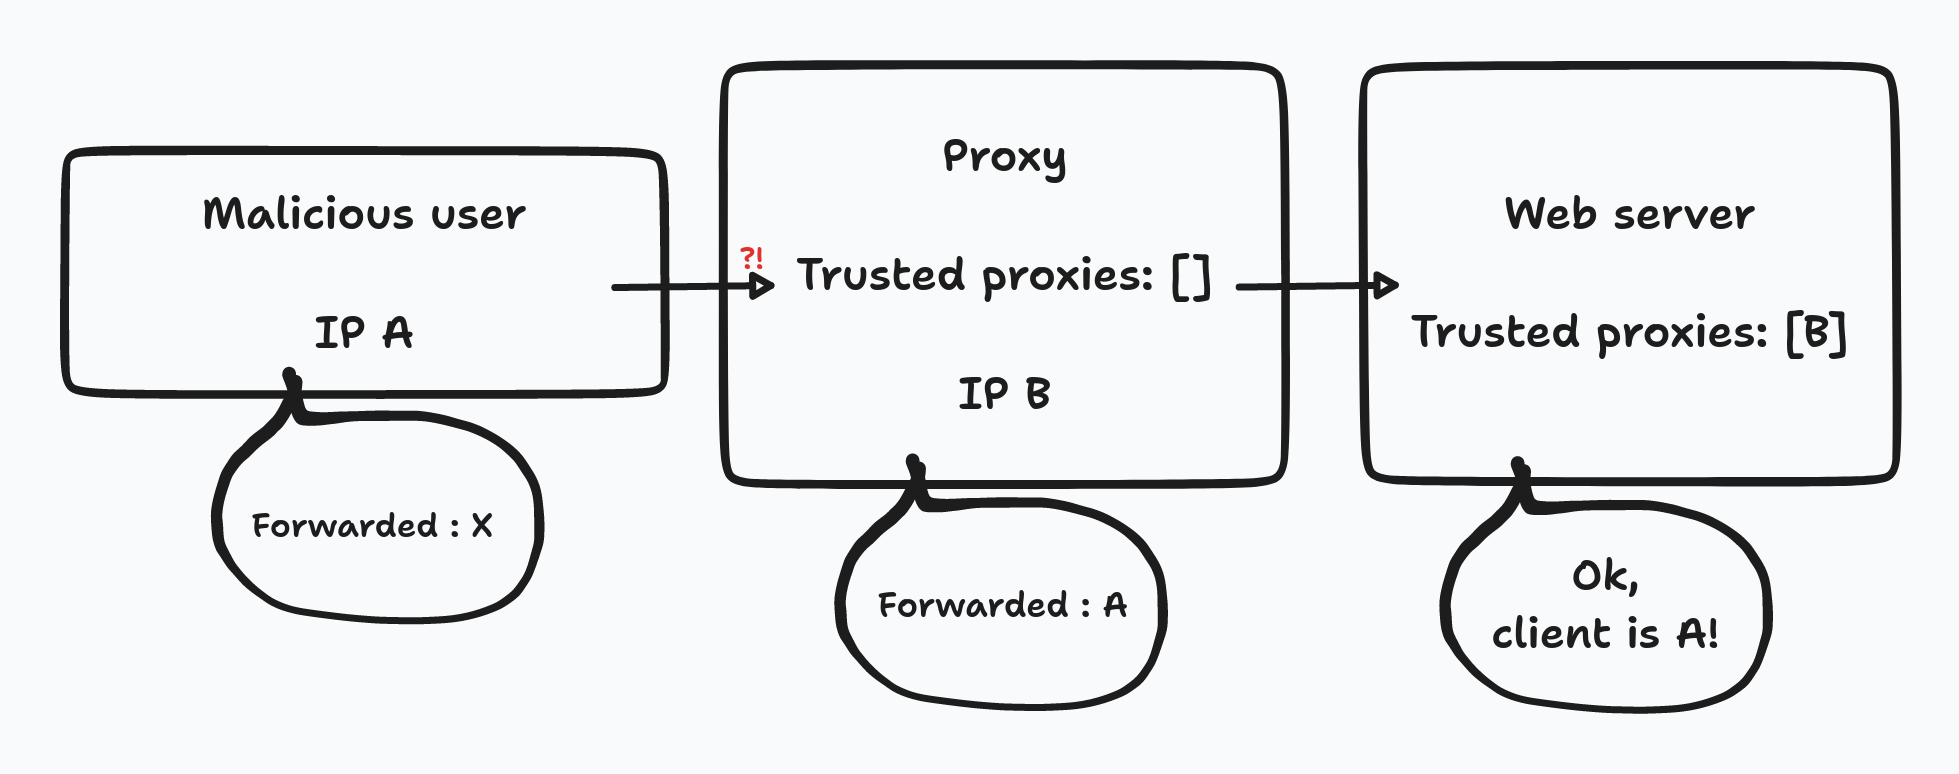 Malicious user is not in the list of trusted proxies